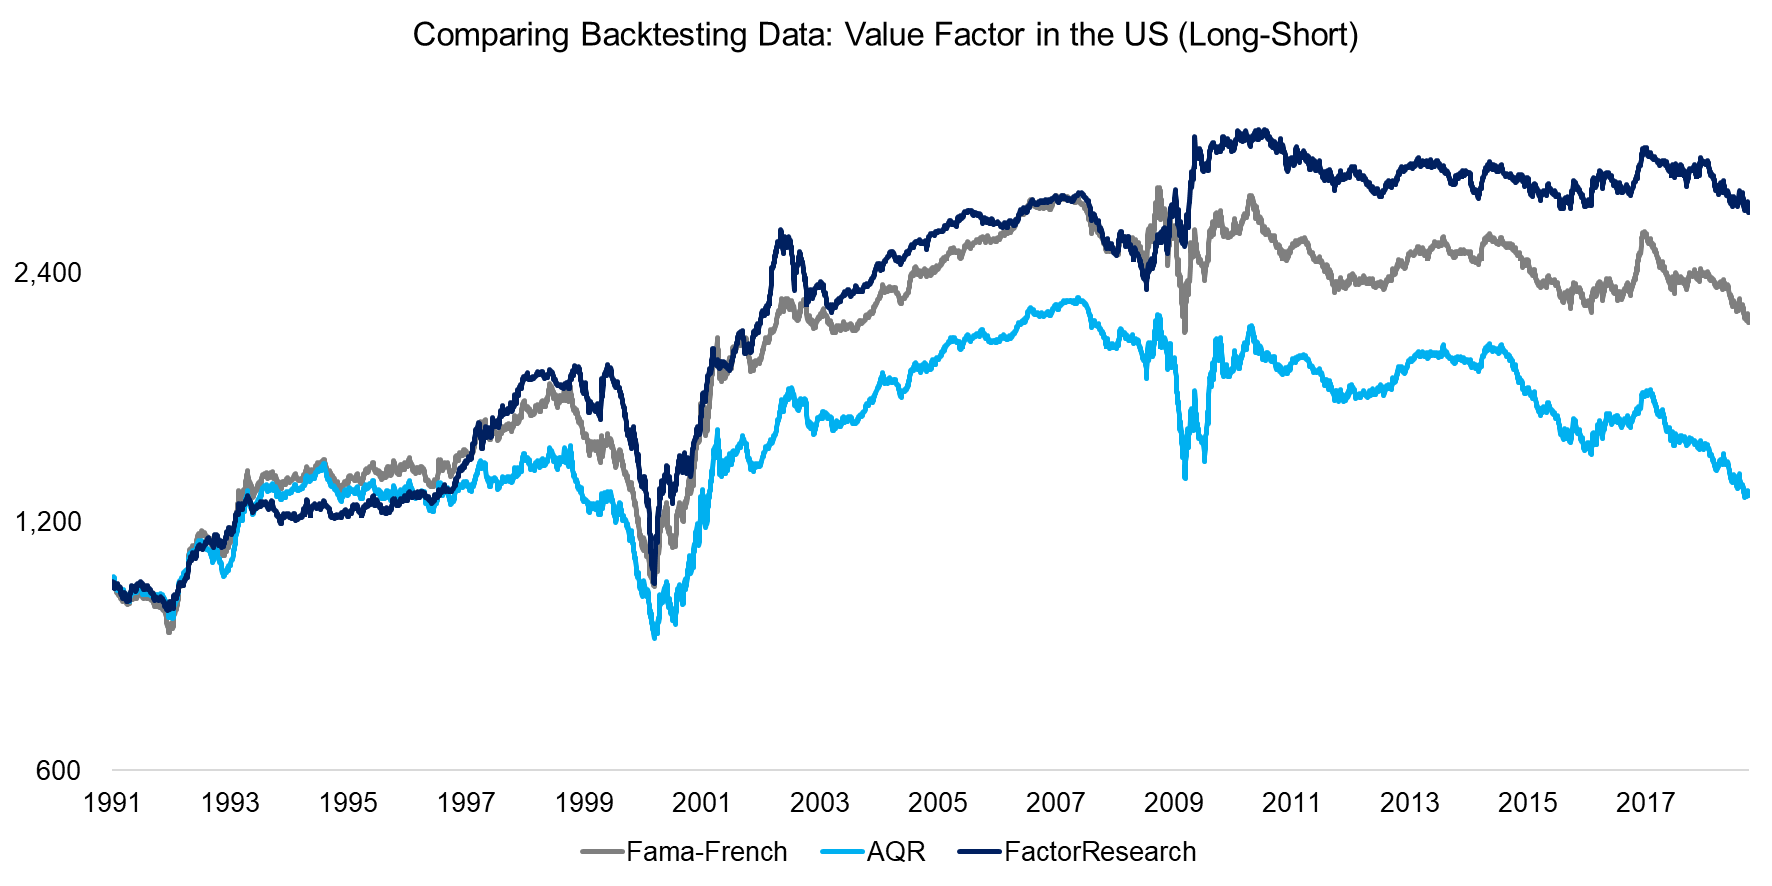 Comparing Backtesting Data Value Factor in the US (Long-Short)